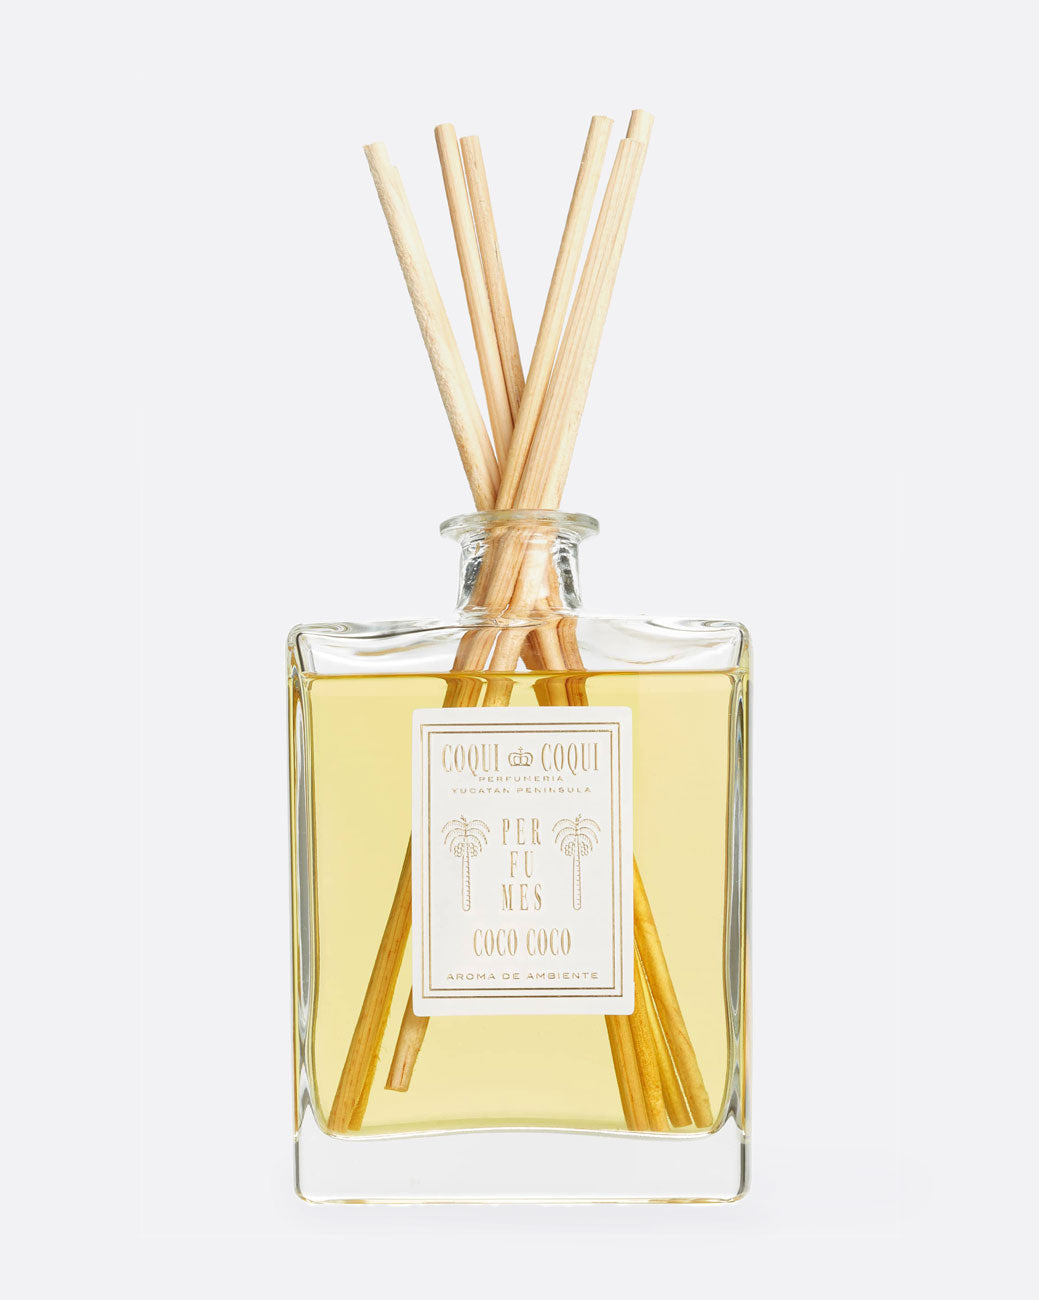 image of coqui coqui reed diffuser - a glass bottle with wooden sticks out the top